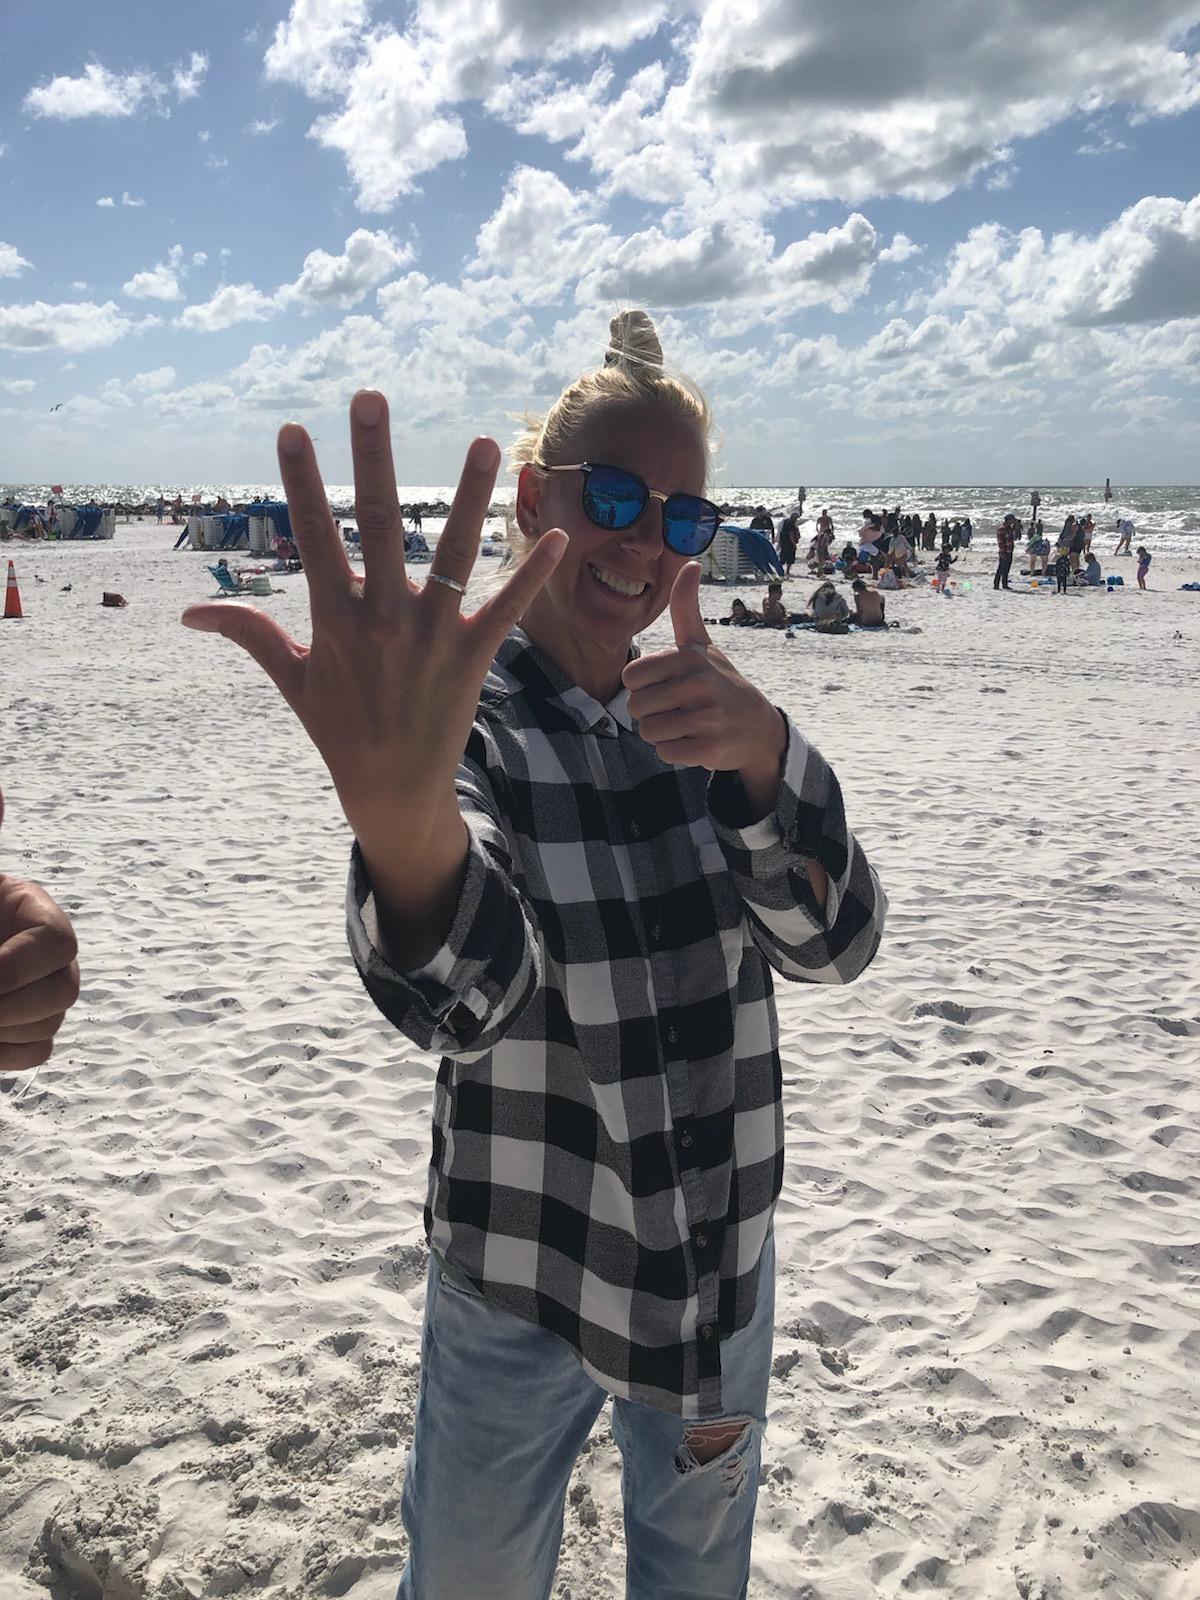 Ring Lost on Clearwater Beach, Recovered By SRARC